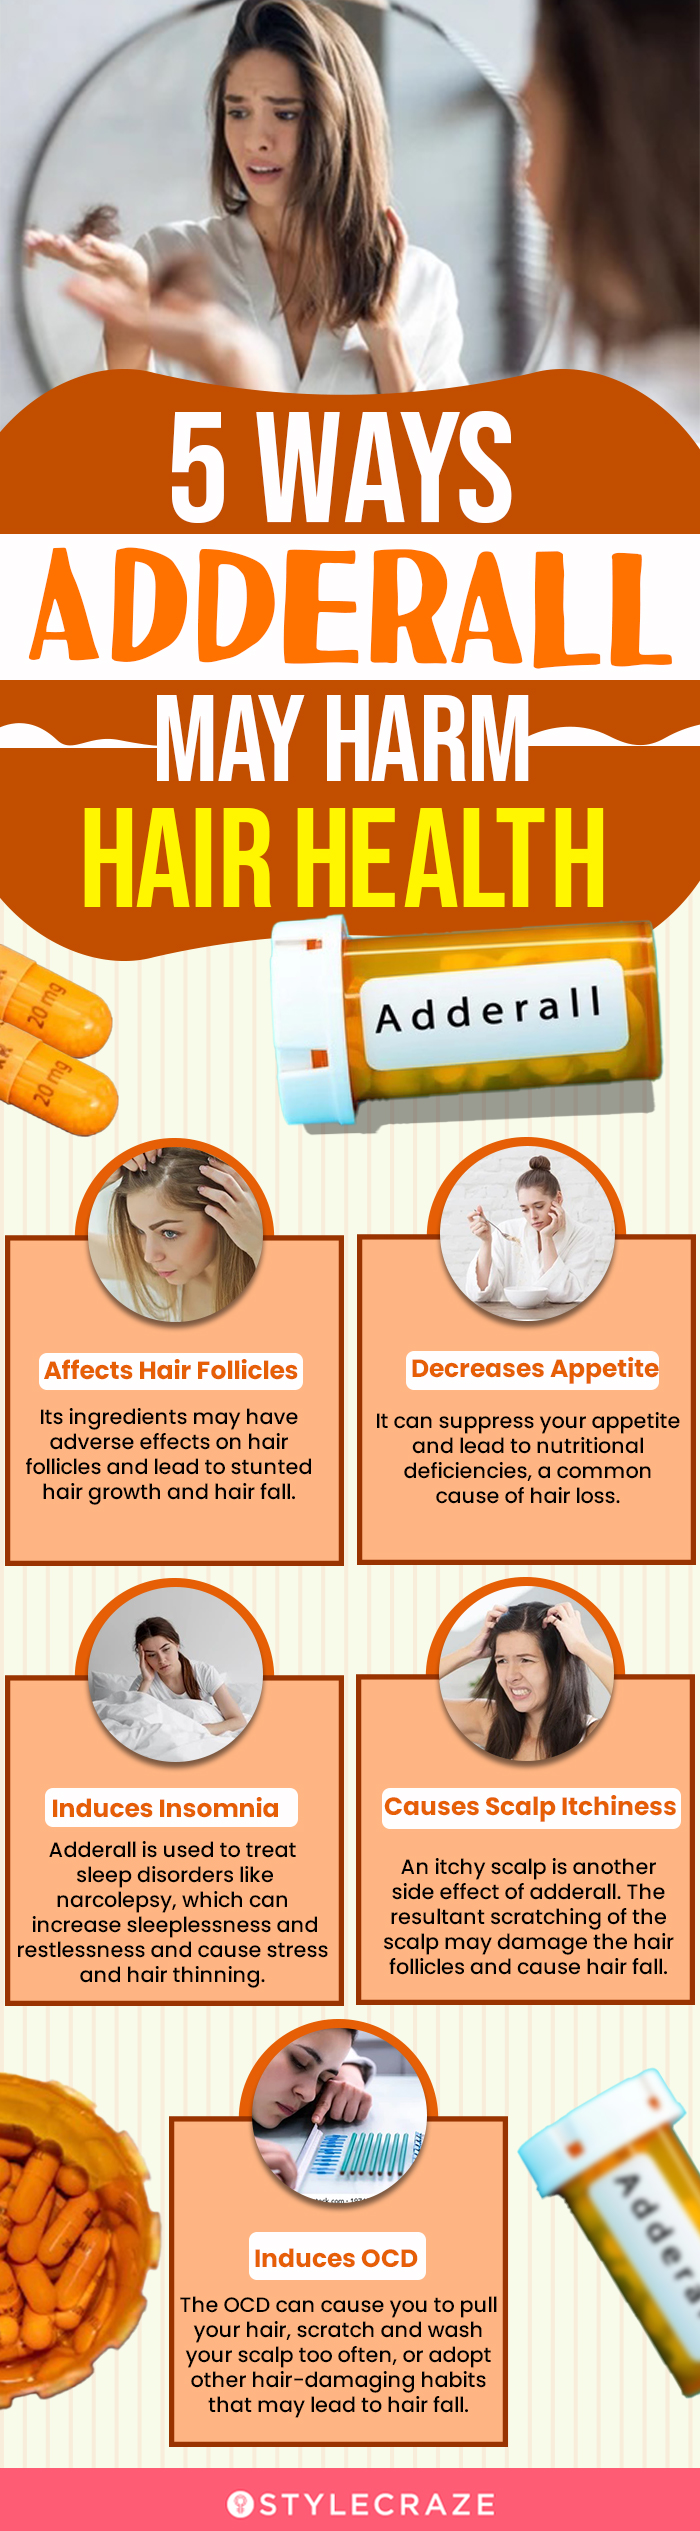 5 ways adderall may harm hair health (infographic)